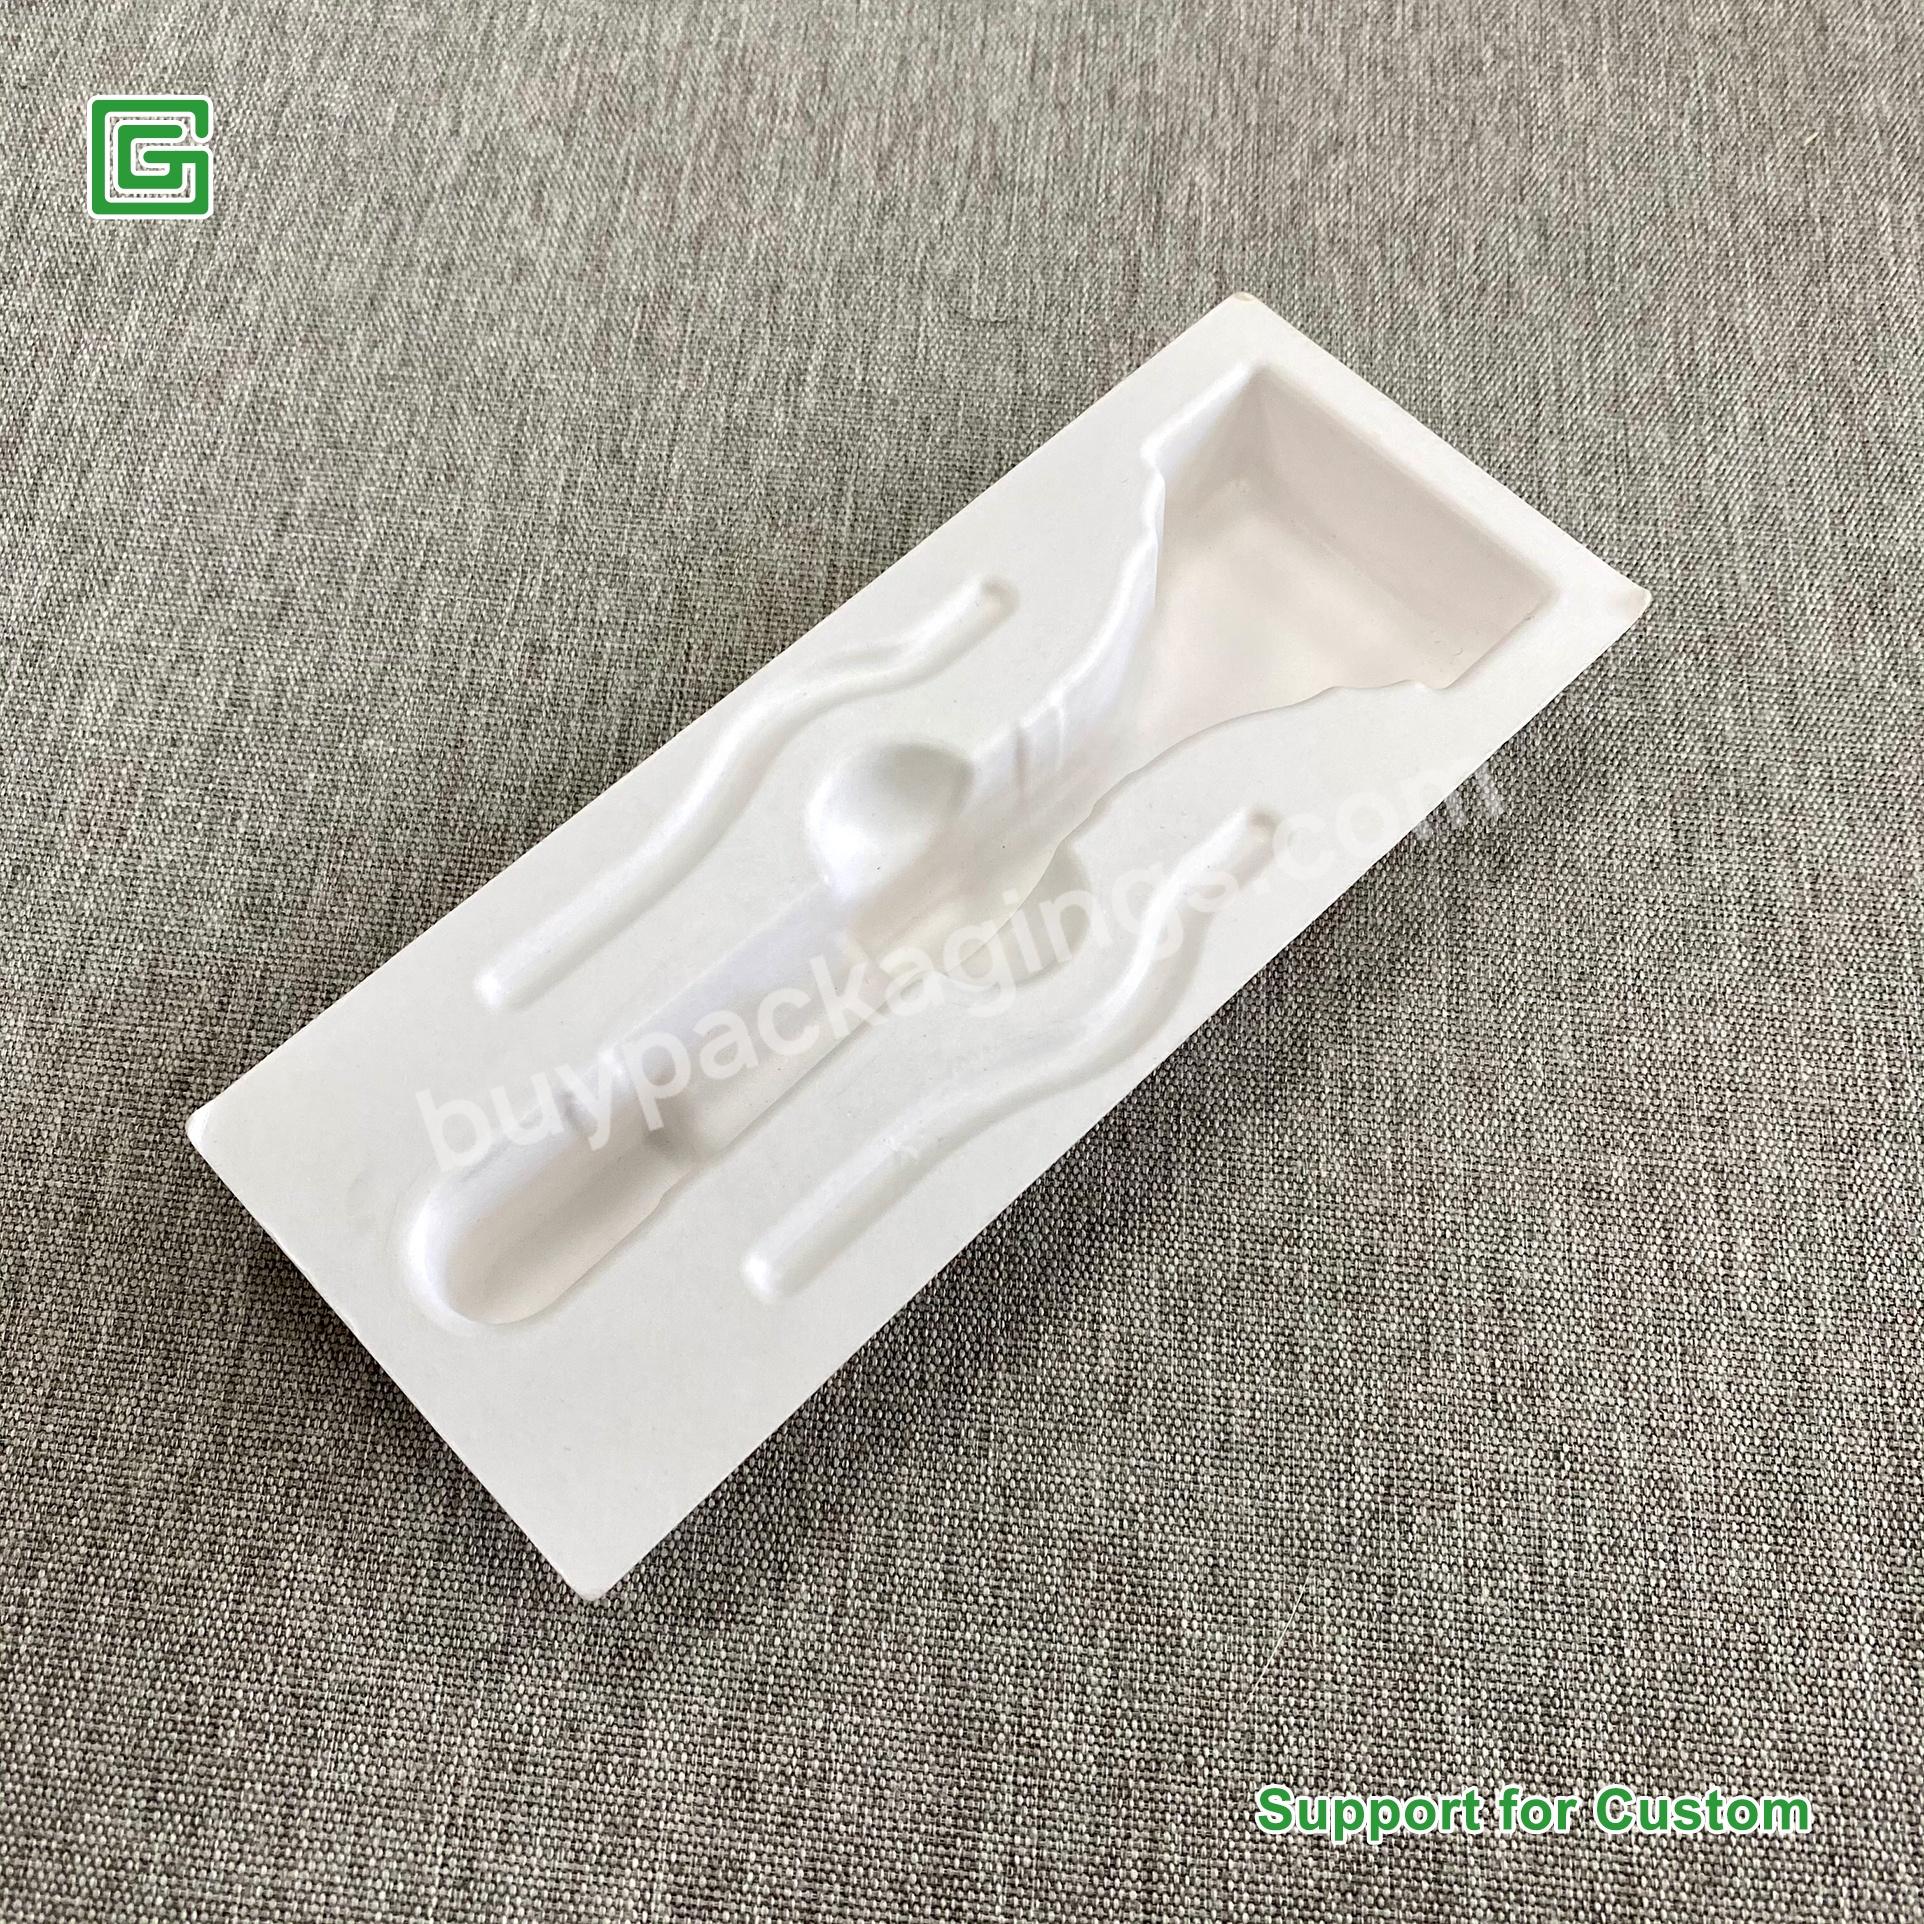 High Quality Biodegradable Bagasse Paper Fiber Packaging Sustainable Molded Pulp Razor Inner Tray - Buy Molded Pulp Paper Insert Tray,Wet Pressing Molded Paper Pulp Tray,Biodegradable Bagasse Paper Fiber Razor Packaging.